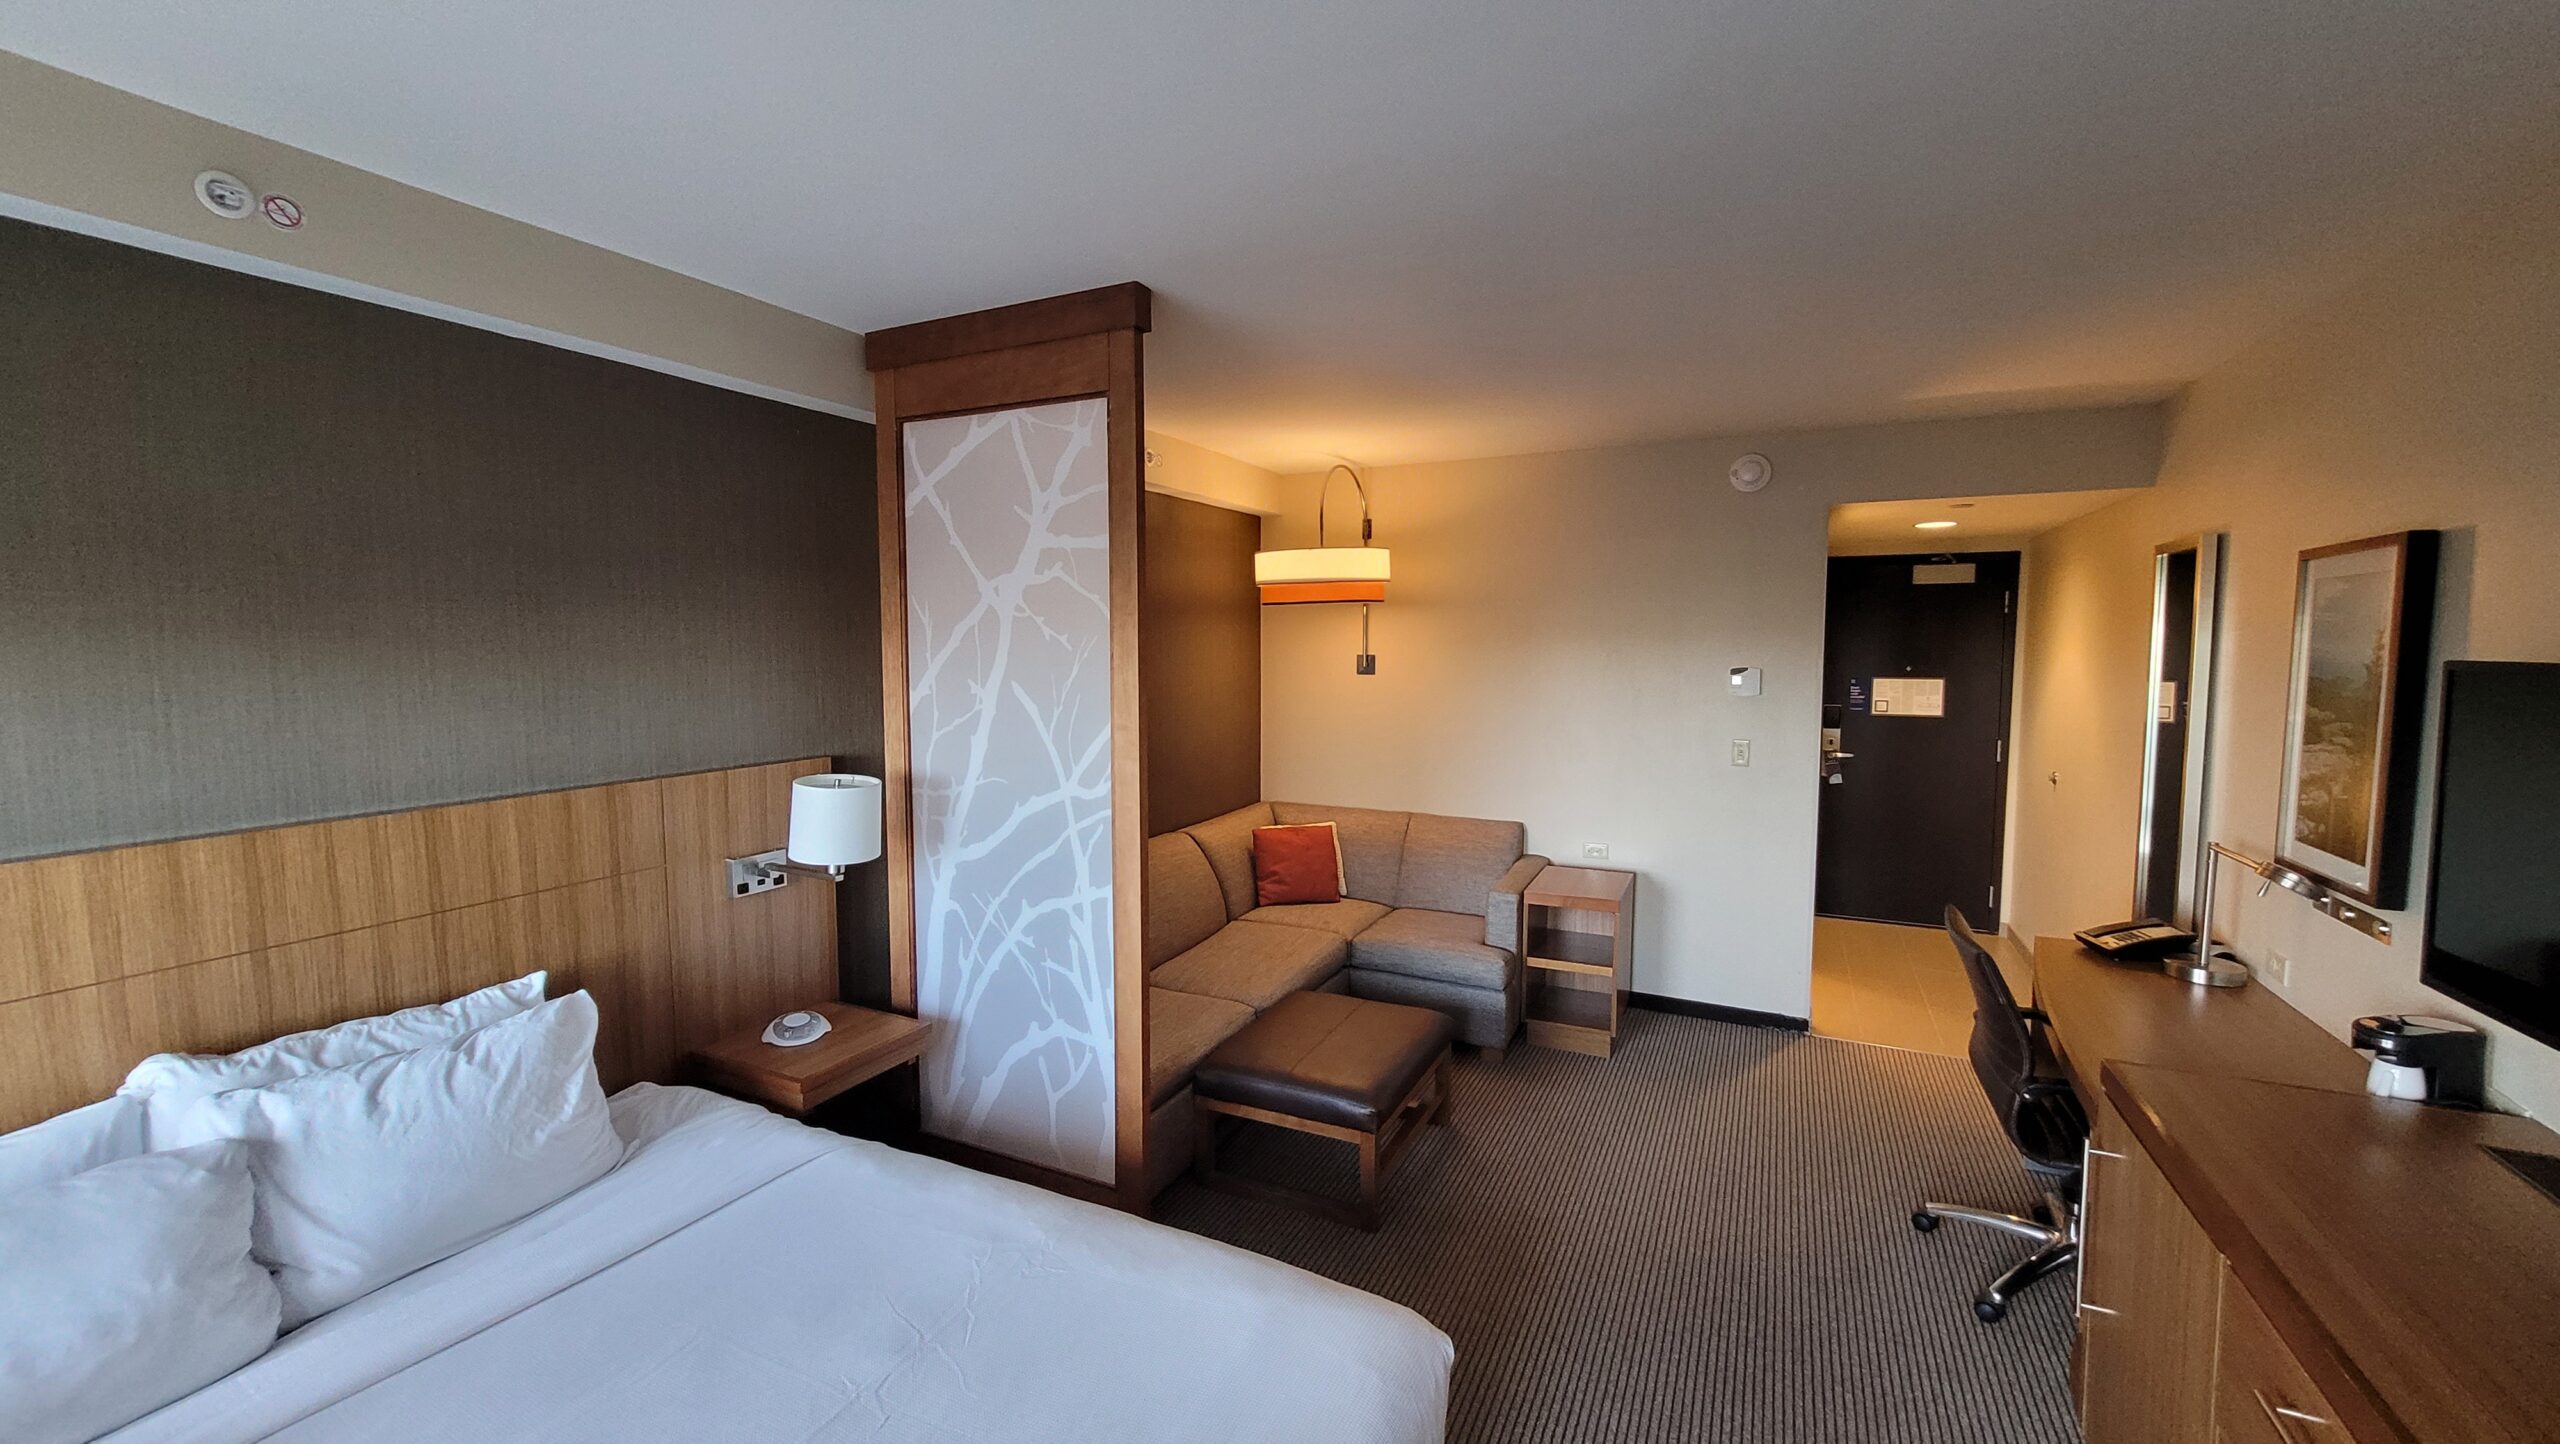 Hyatt Place Old Port – A Quick Review